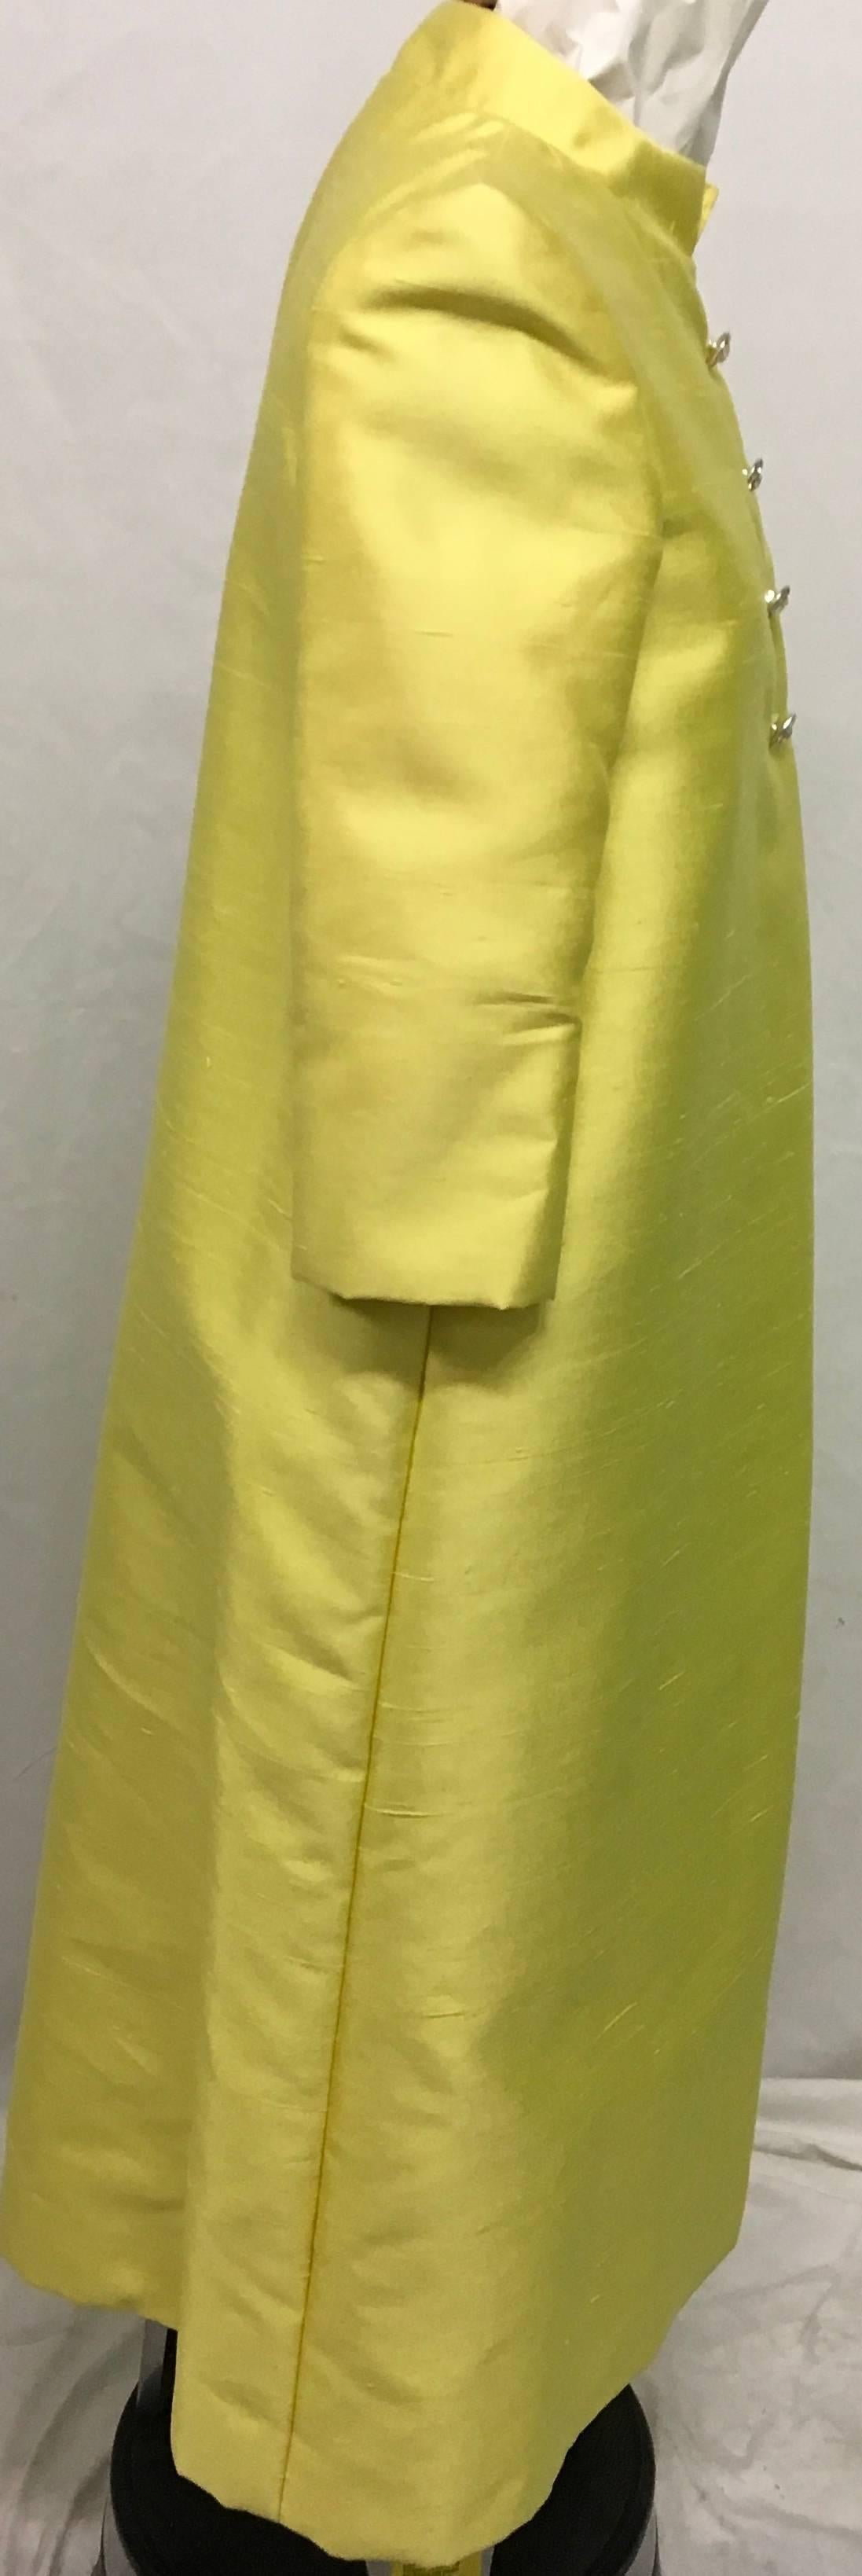 Tefft's of Palm Beach Women's Silk Evening Coat, 1960s  In Excellent Condition For Sale In Boca Raton, FL